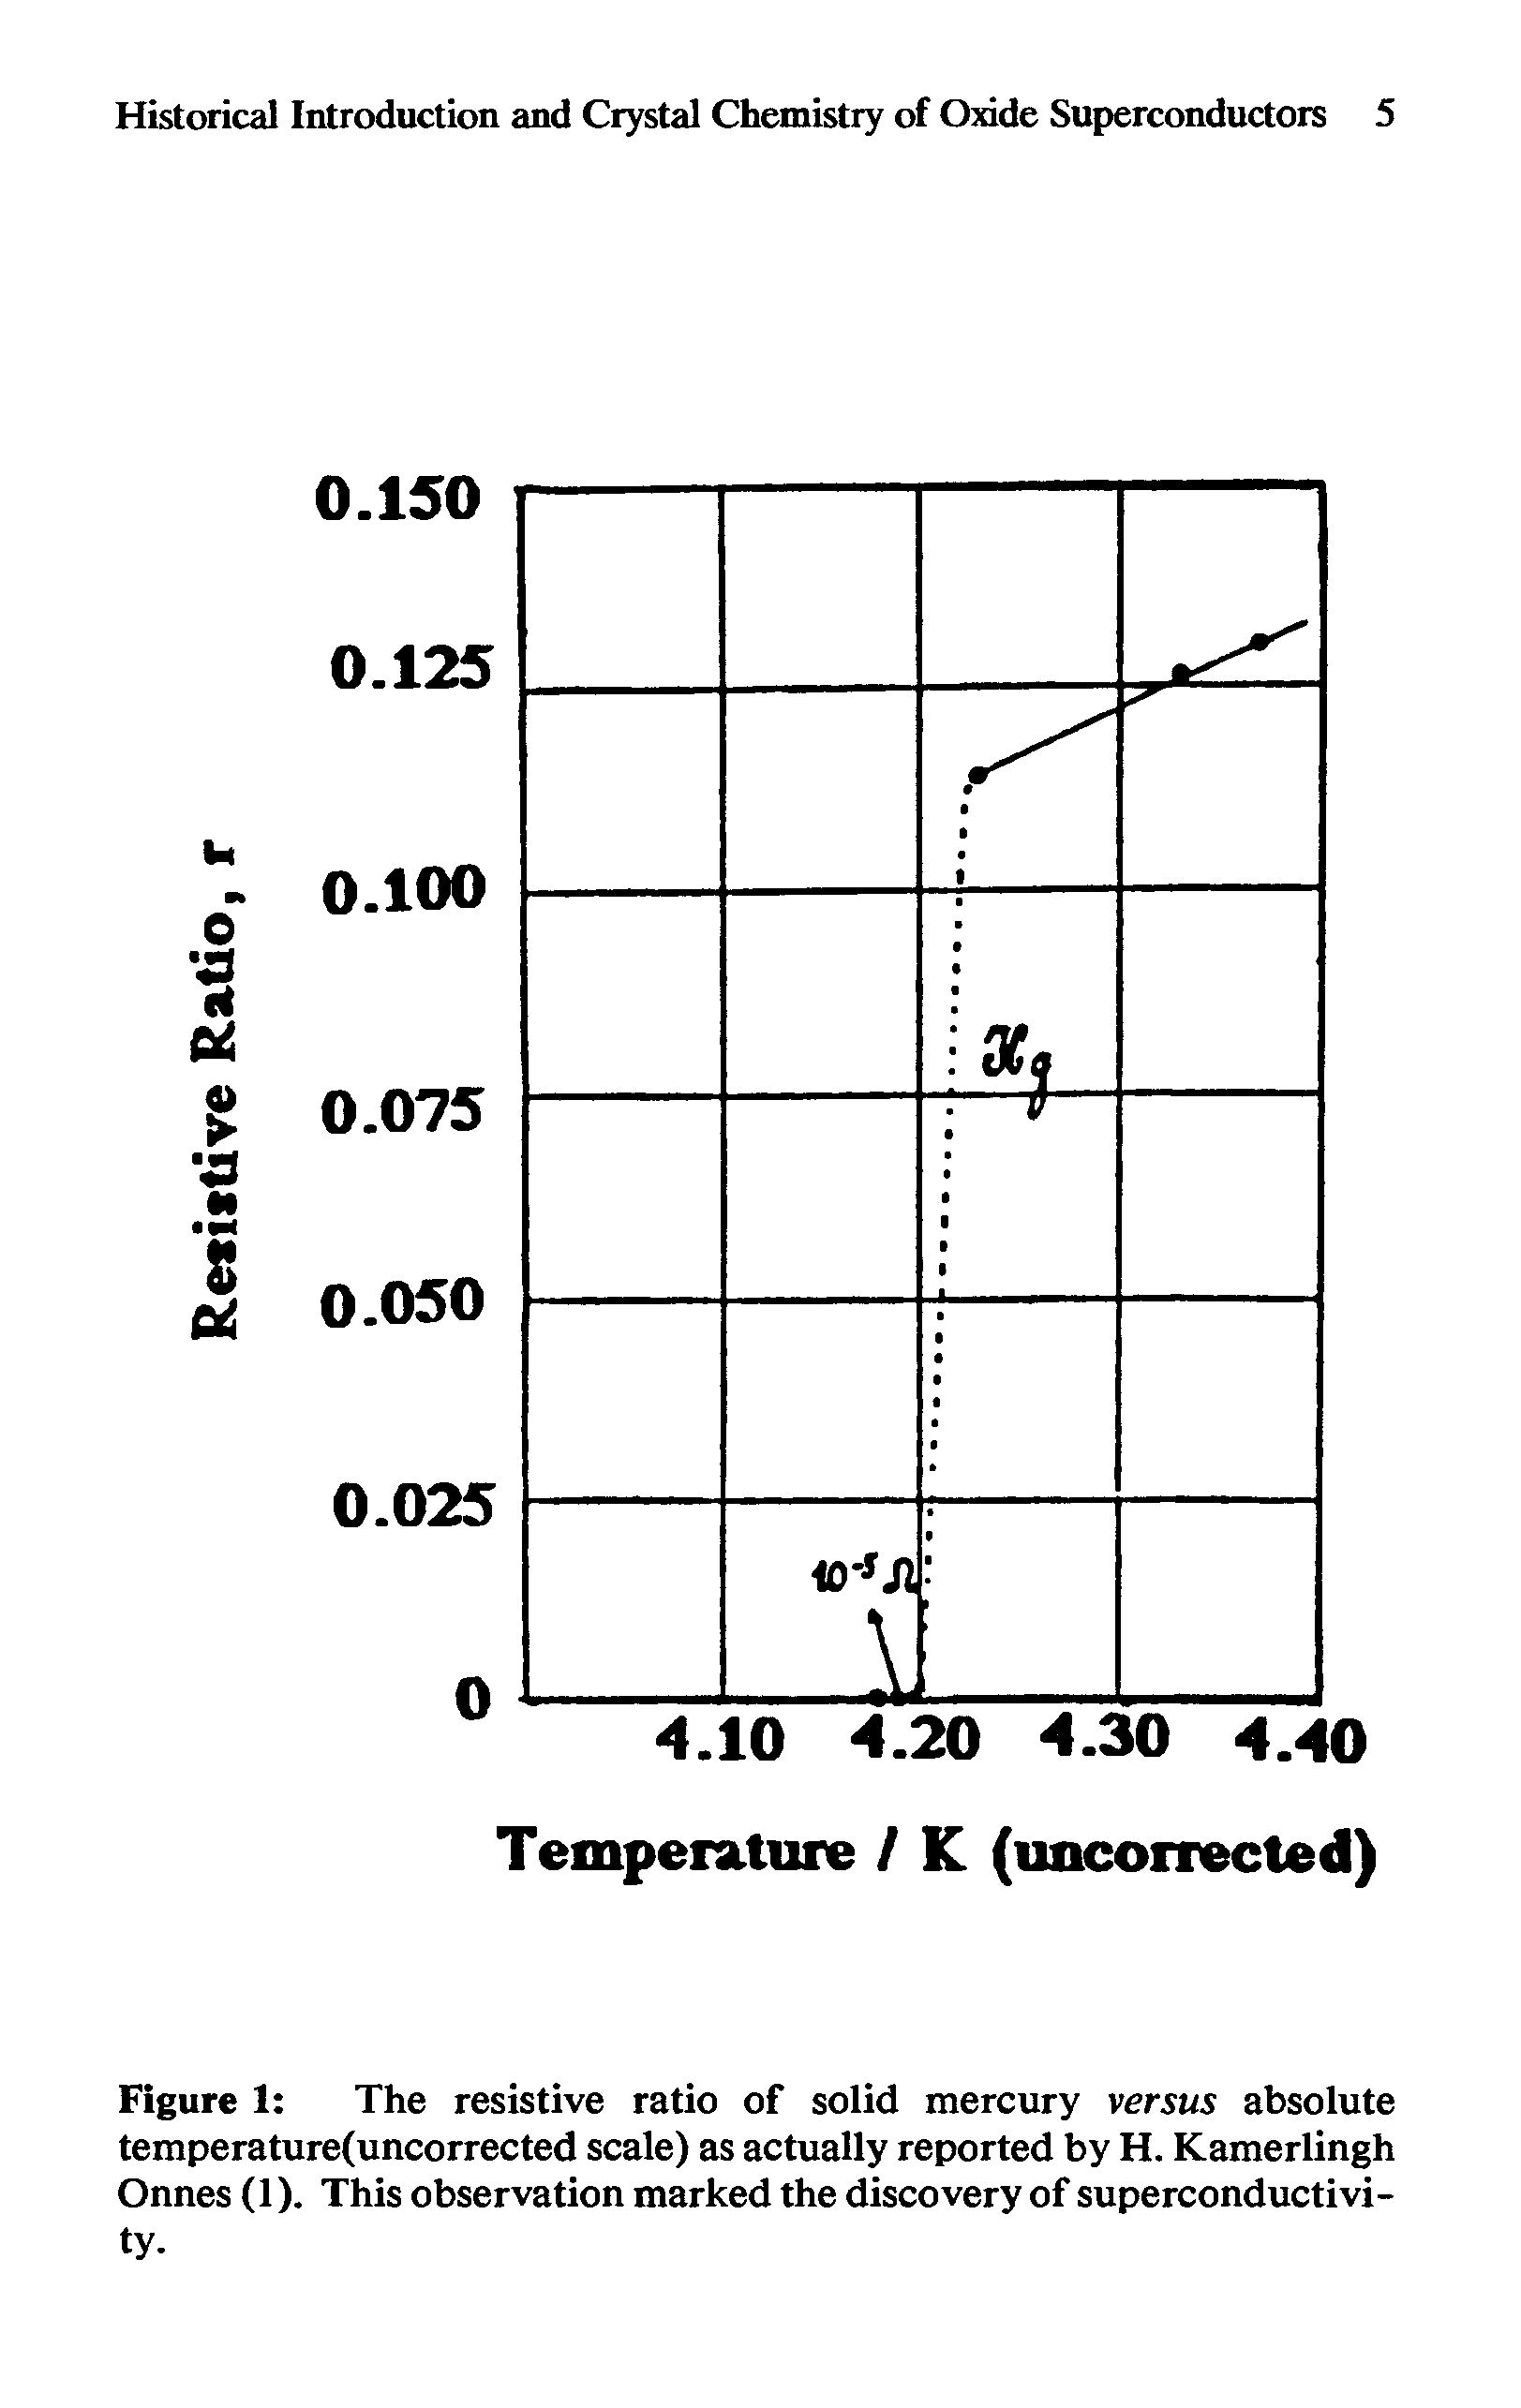 Figure 1 The resistive ratio of solid mercury versus absolute temperature(uncorrected scale) as actually reported by H. Kamerlingh Onnes (1). This observation marked the discovery of superconductivity.